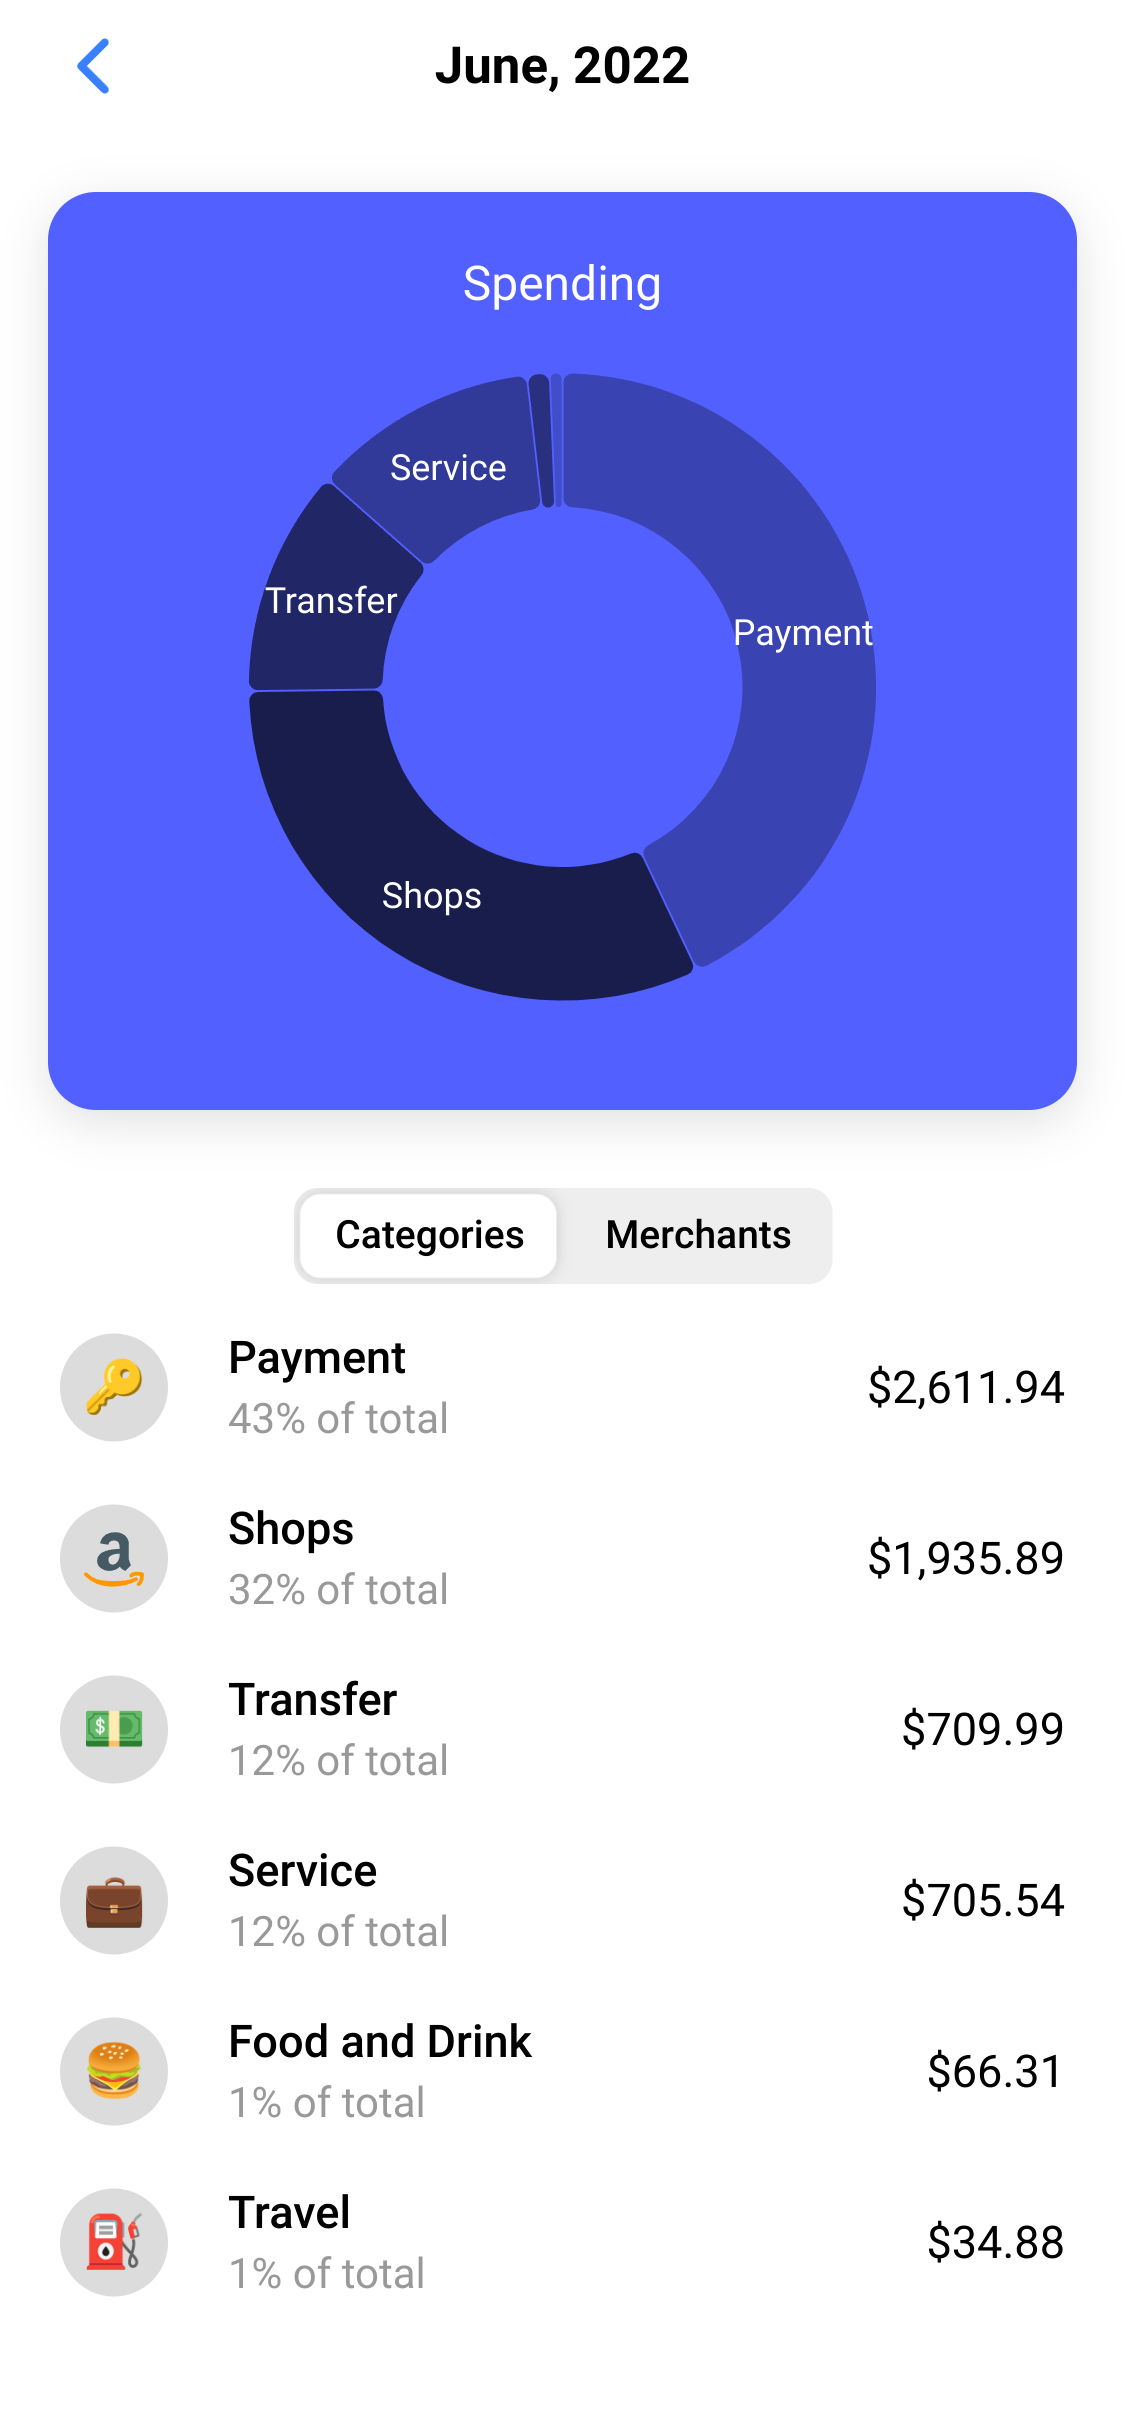 Auto categorizes your spending to show you where your money is going.